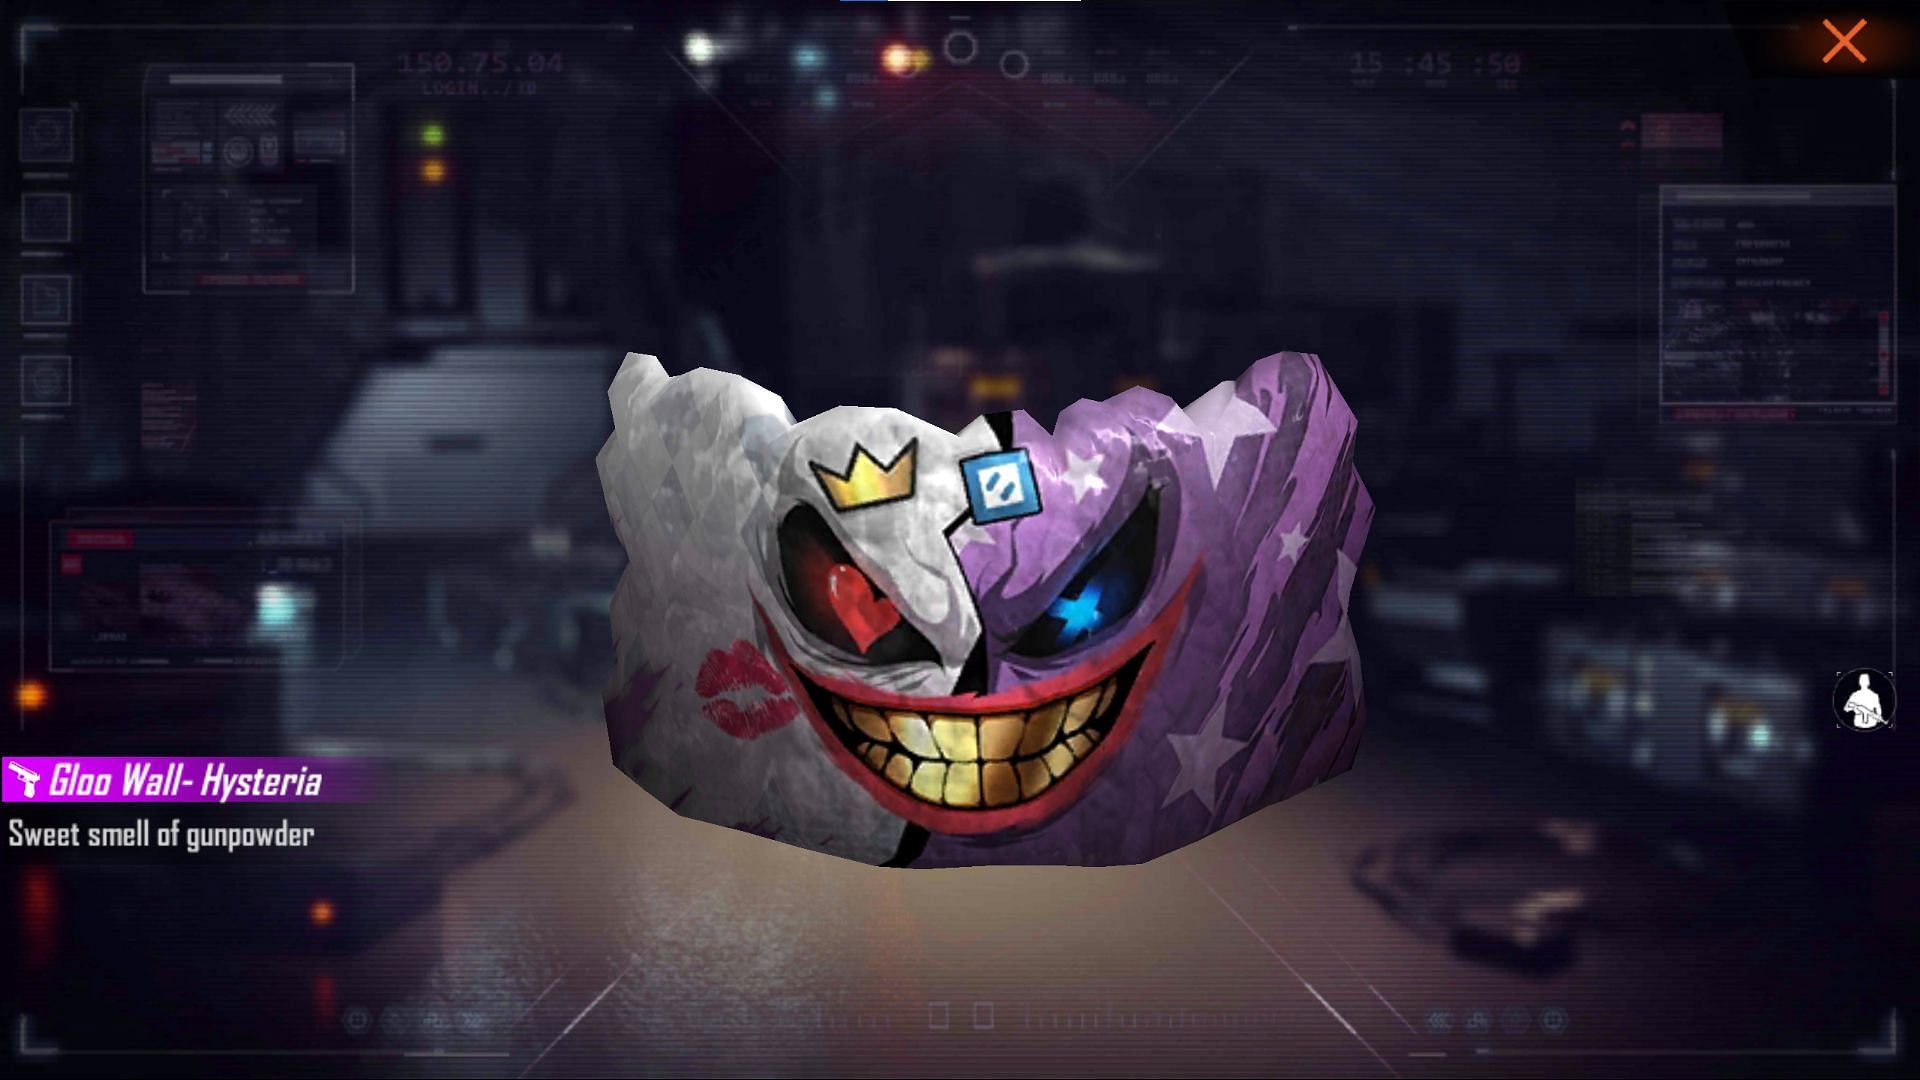 Hysteria gloo wall was available as a free reward a few months back (Image via Garena)